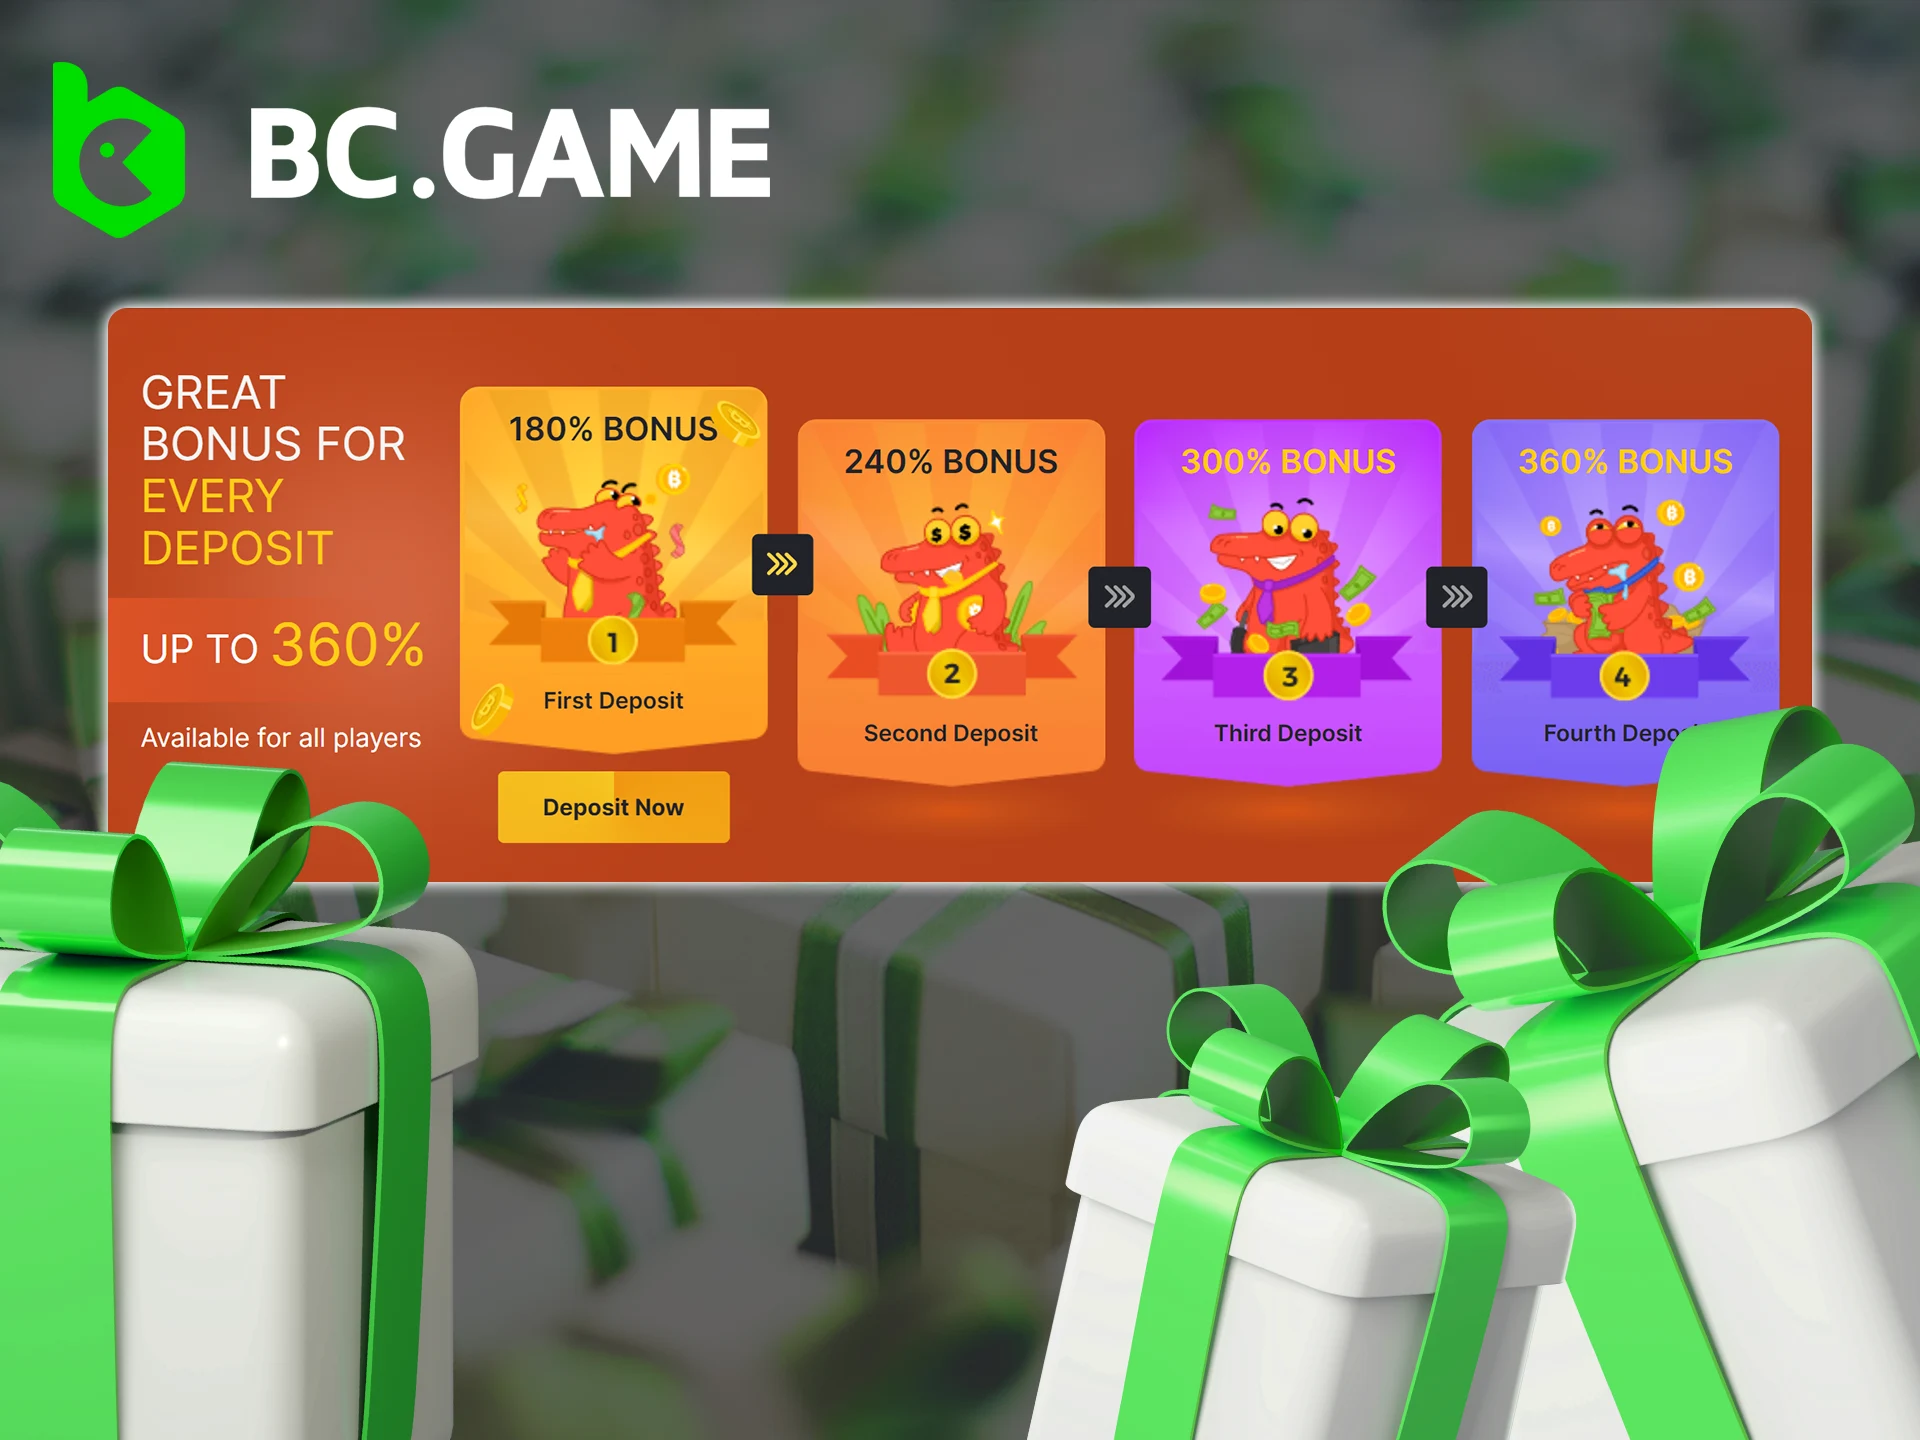 Get the BC Game welcome bonus and use it in football betting.